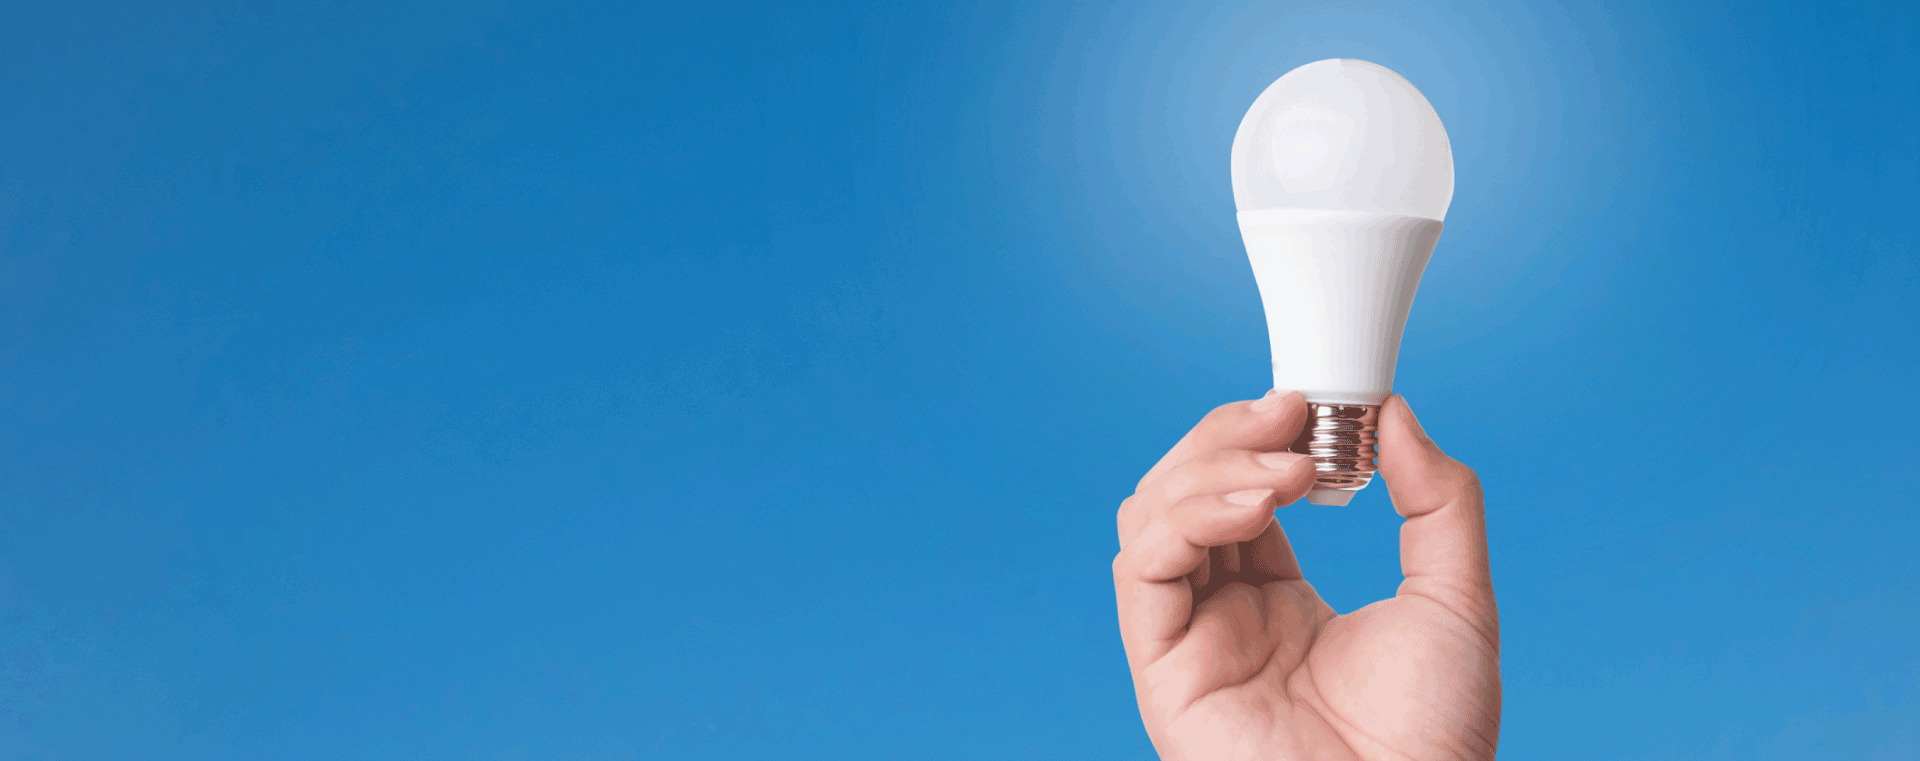 Are you using the right light bulbs for the season?